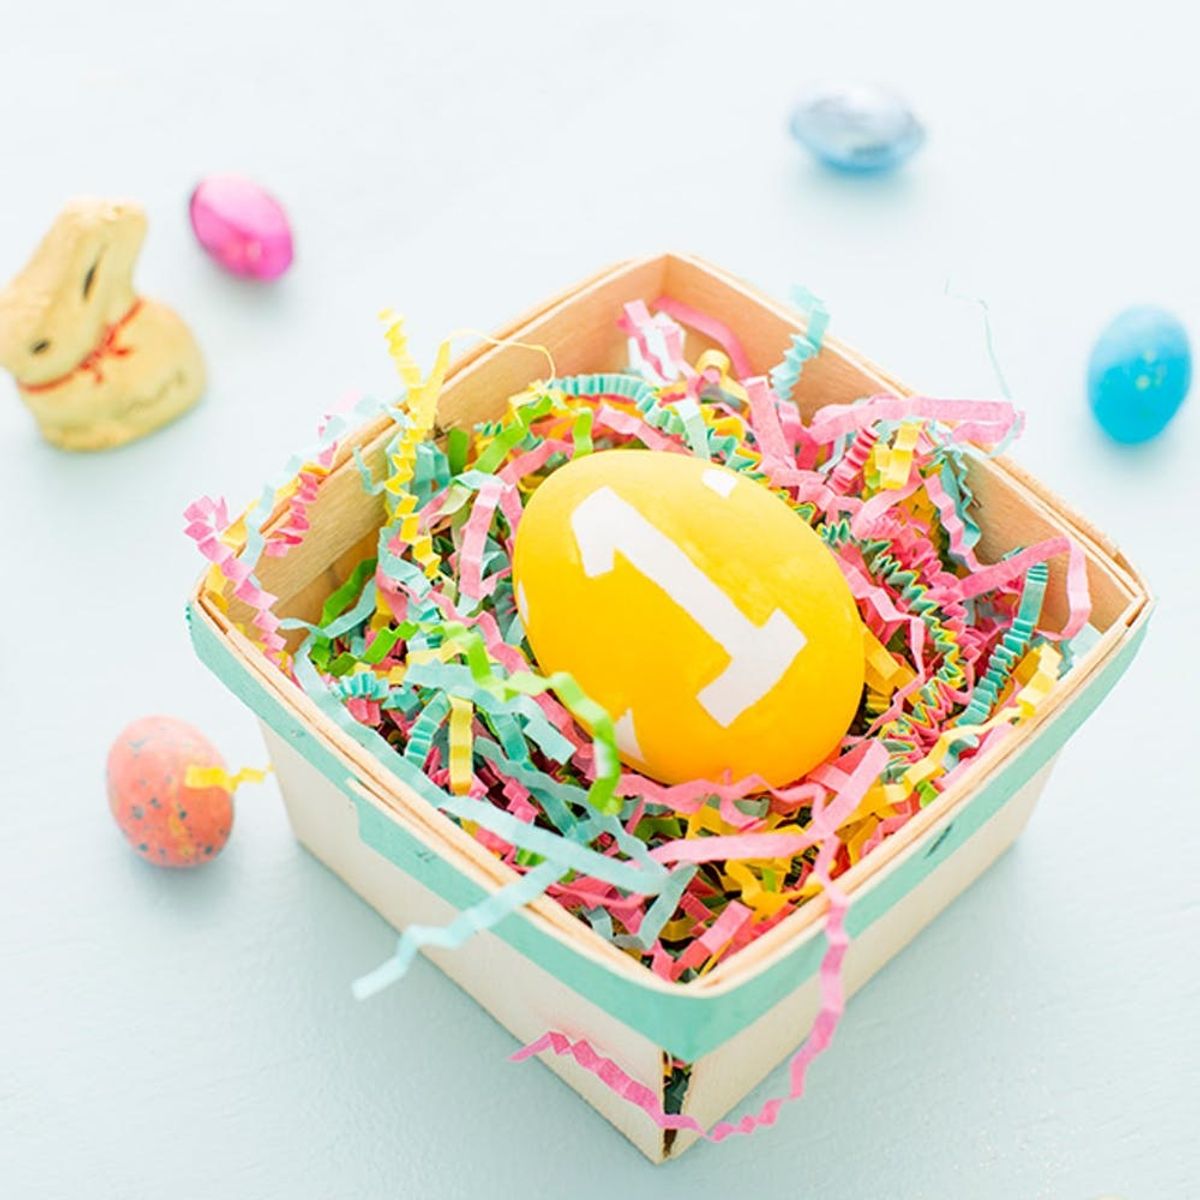 Make This DIY Easter Egg Scavenger Hunt for the Grownups at Your Party